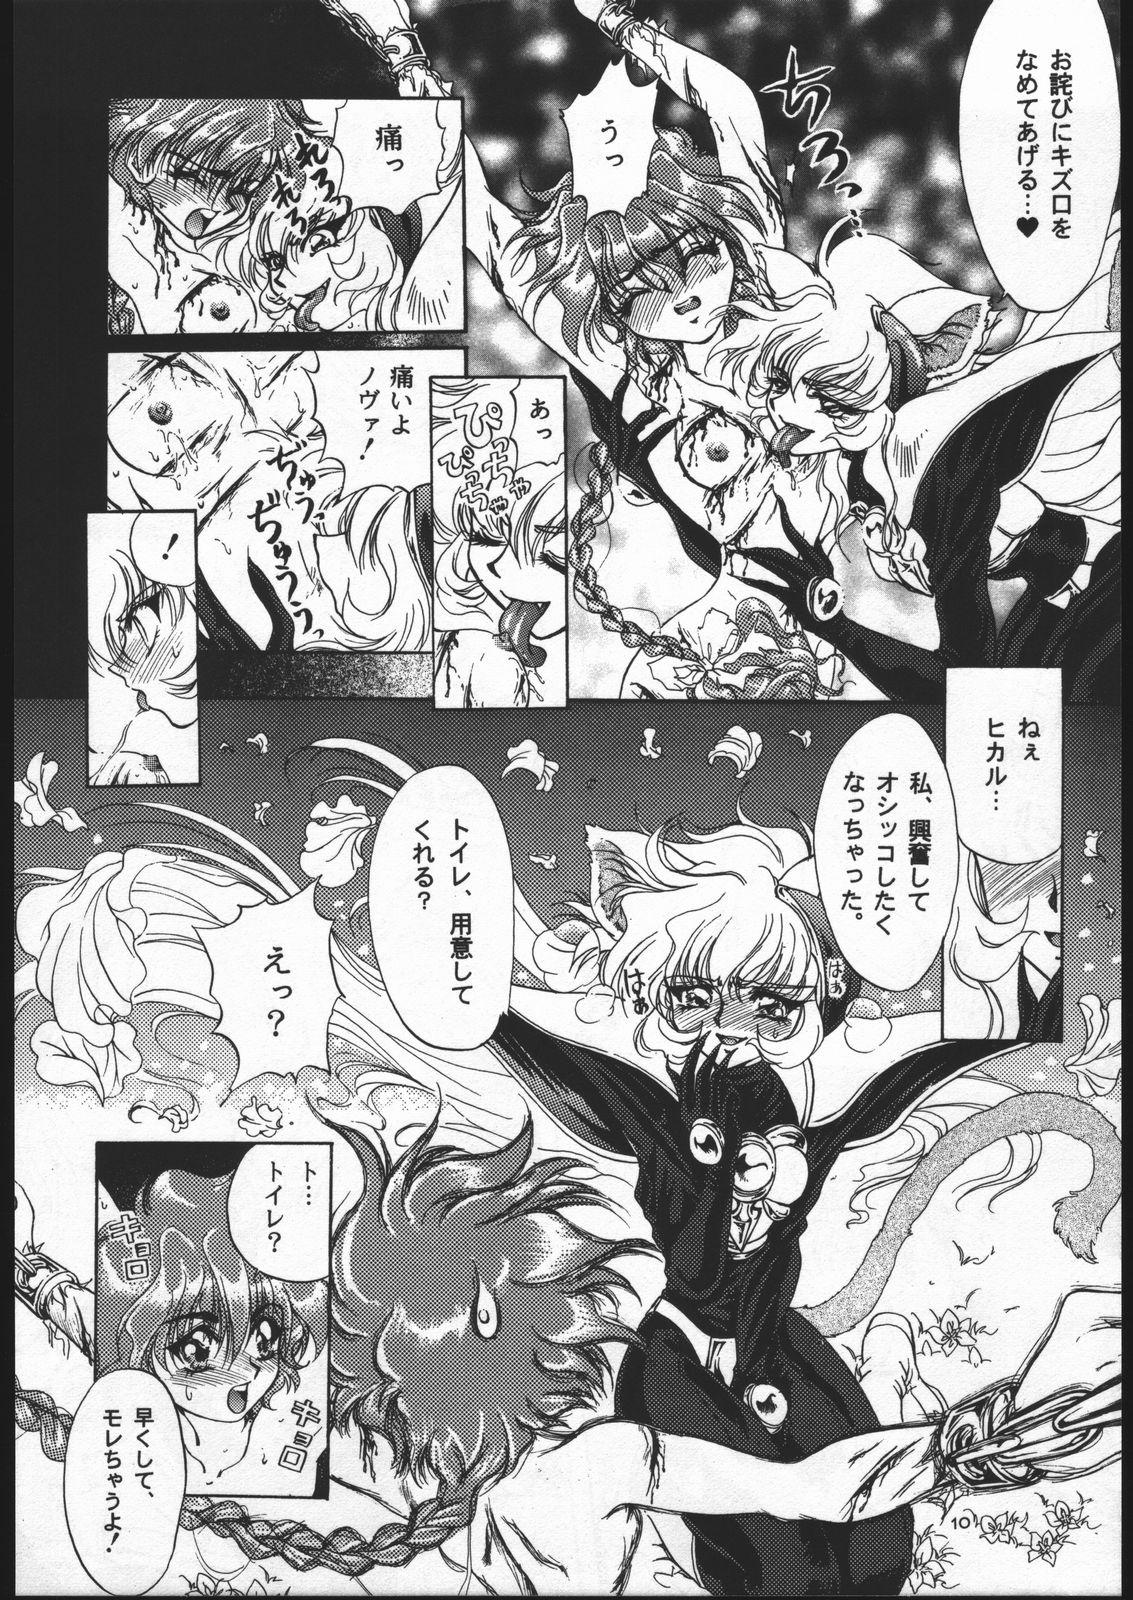 Curves Rose Pink - Magic knight rayearth Baile - Page 9